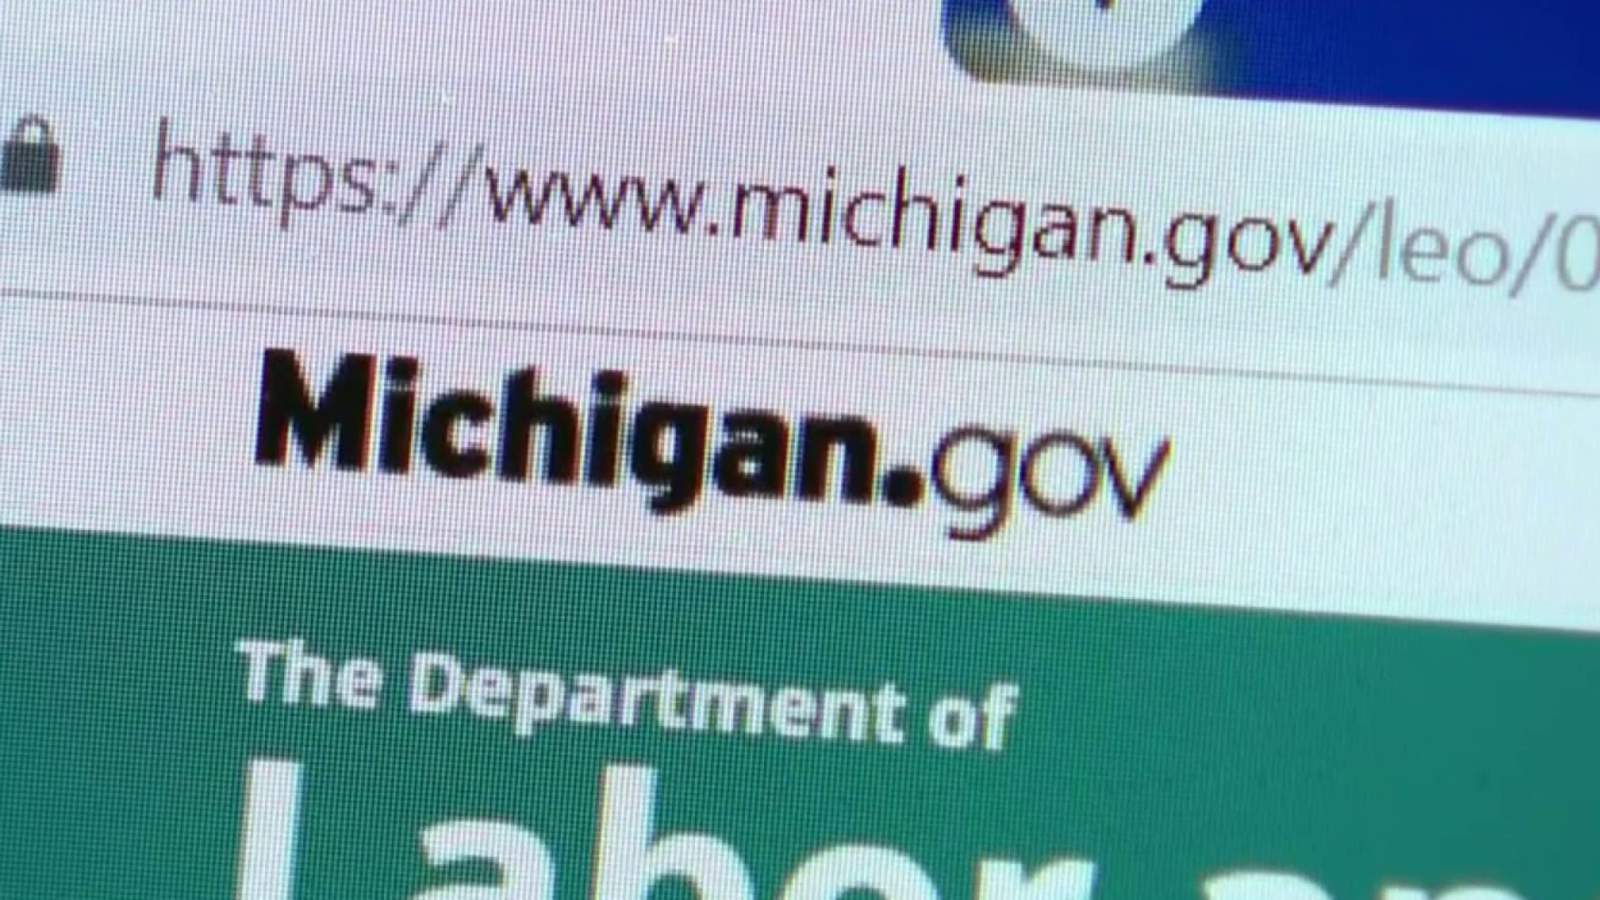 Updating the progress of getting unemployment benefits to eligible Michiganders